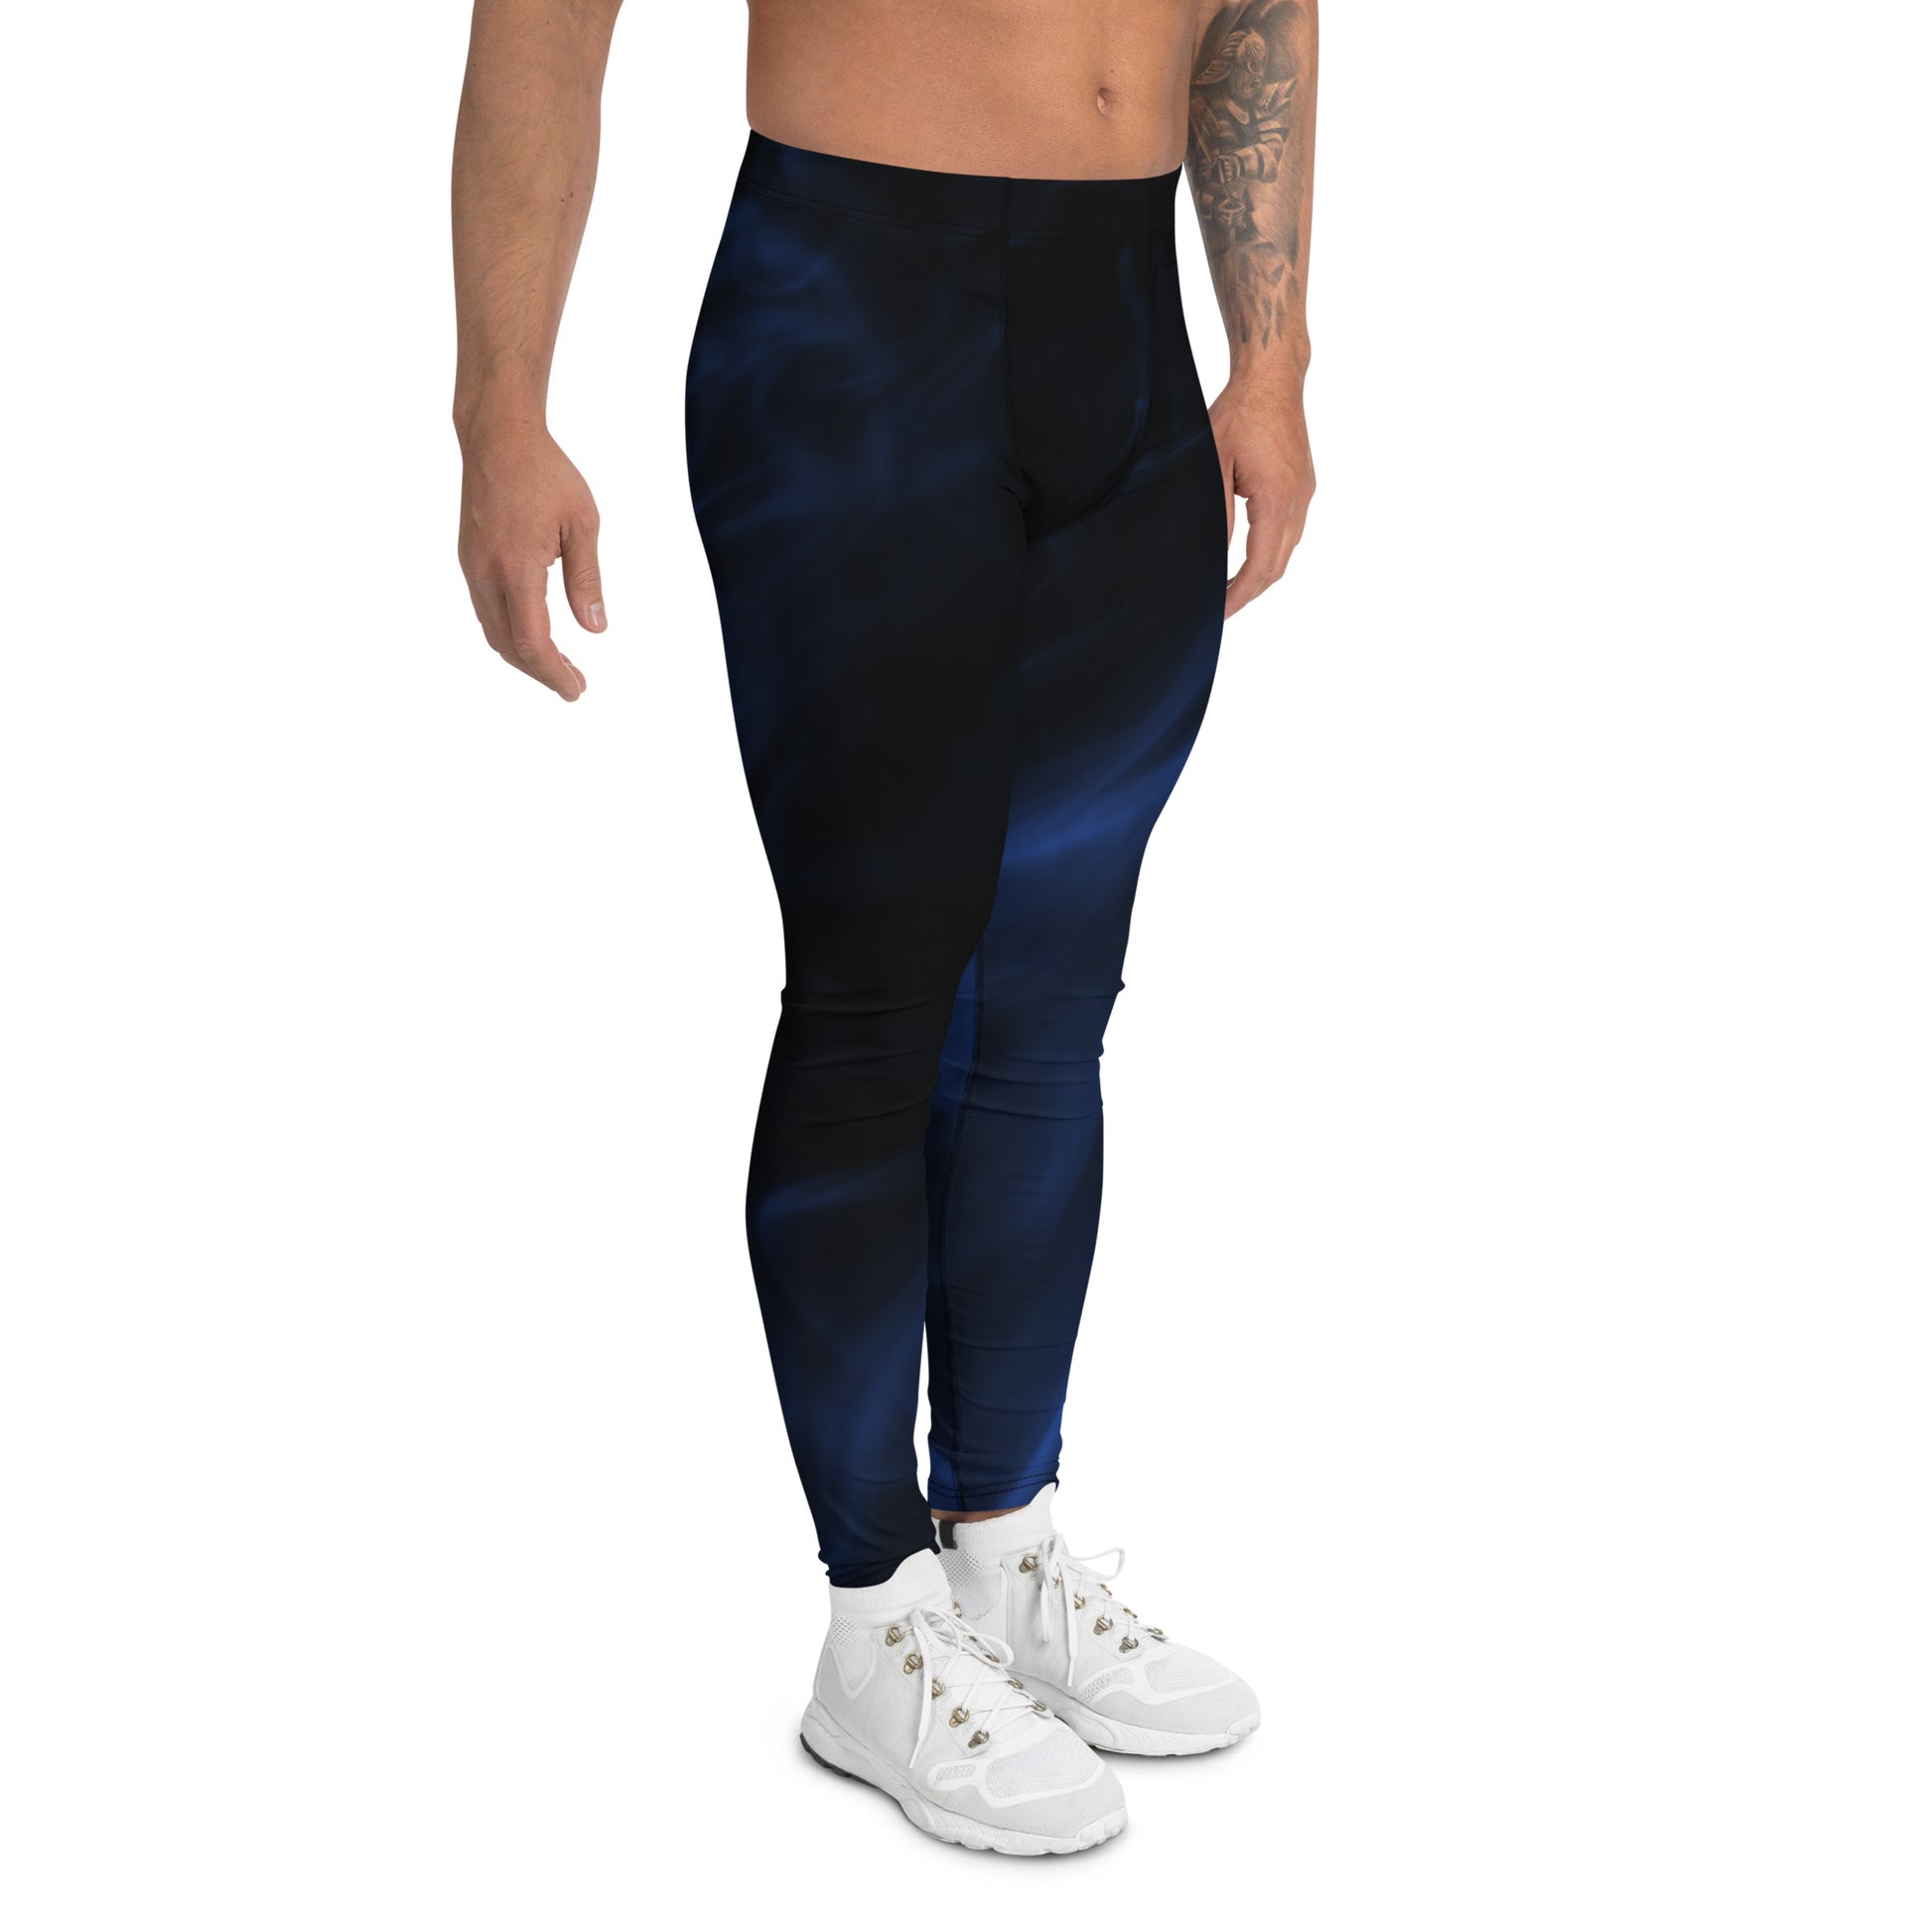 Men's long all-over print black and blue stretchy compression gym leggings